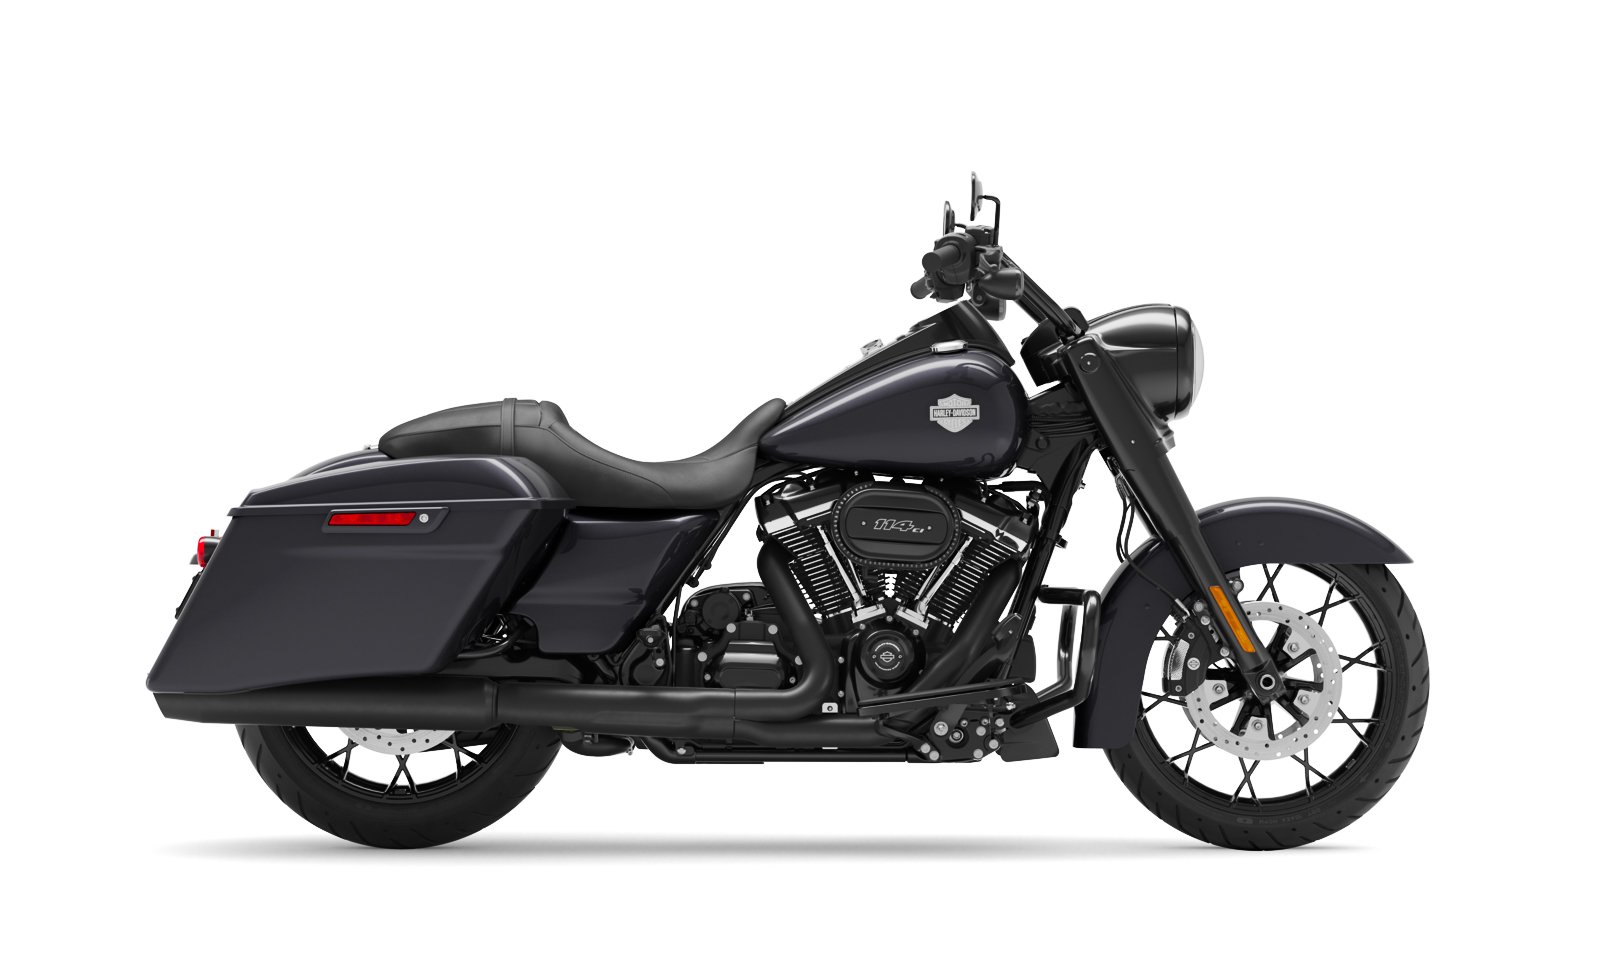 2021 Road King Special Motorcycle Harley Davidson New Zealand